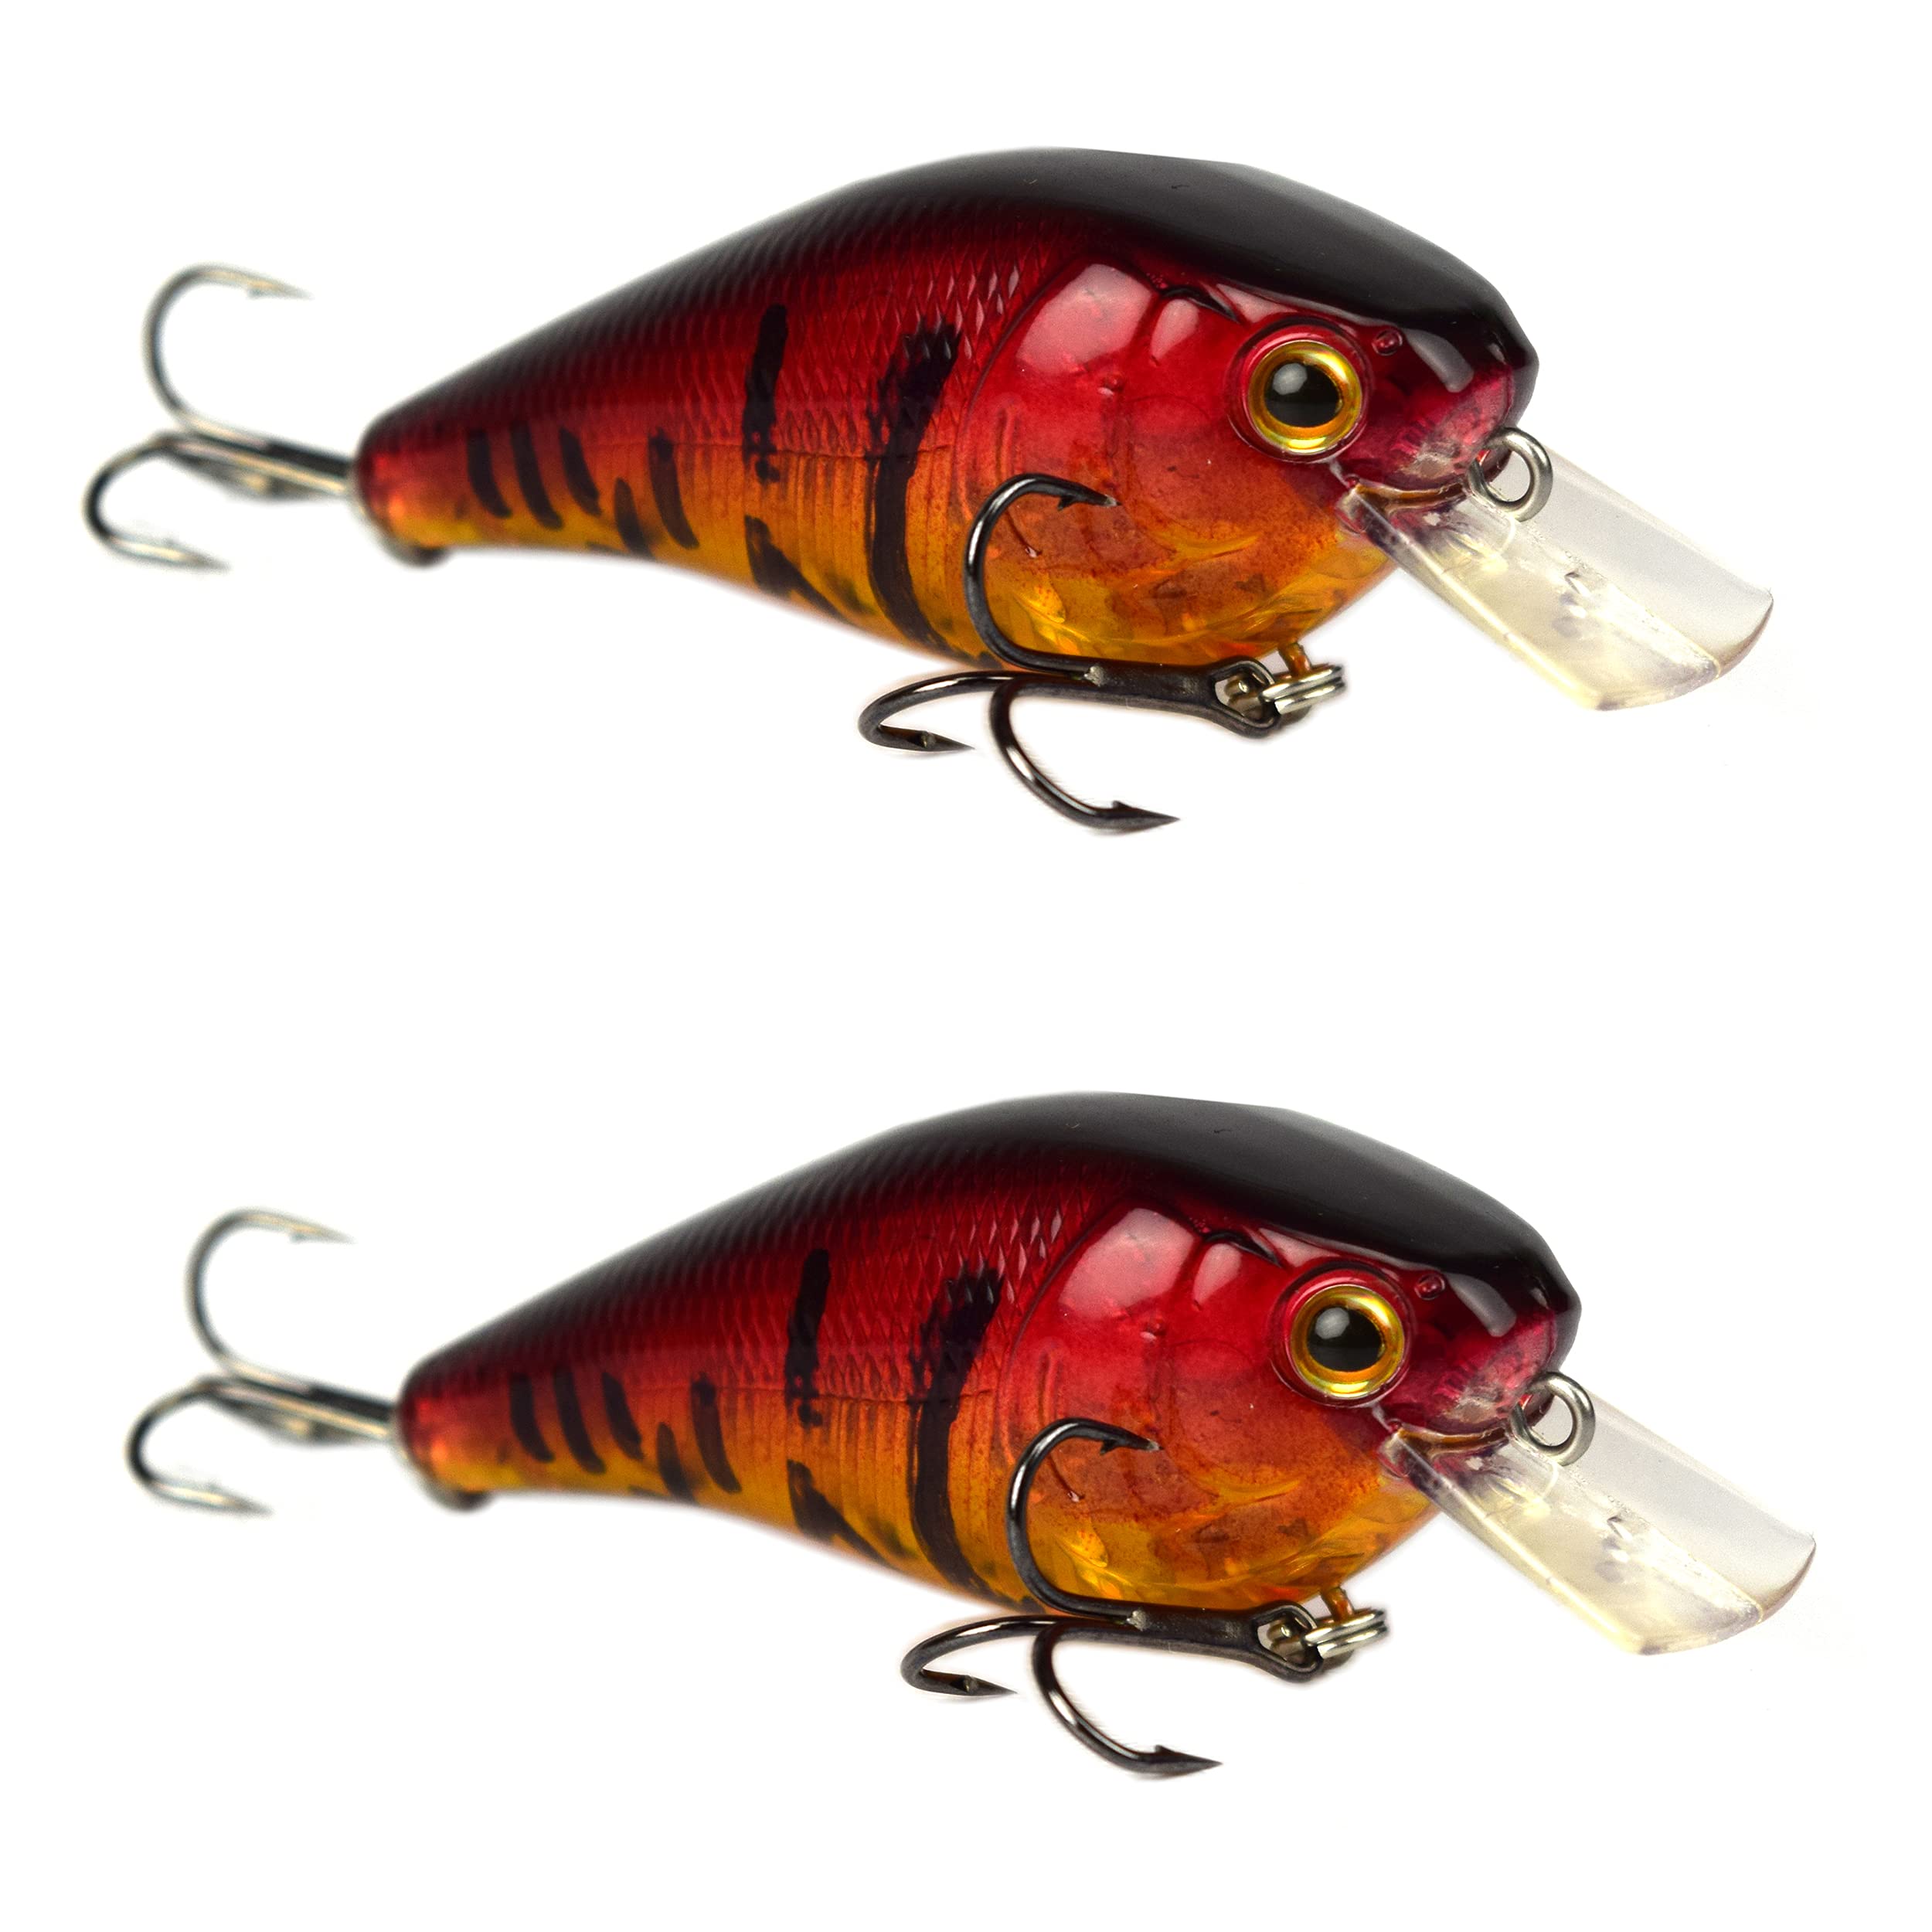 5) Gold/Red Crawfish 2.5” Squarebill Crankbait Fishing Lures With Rattles